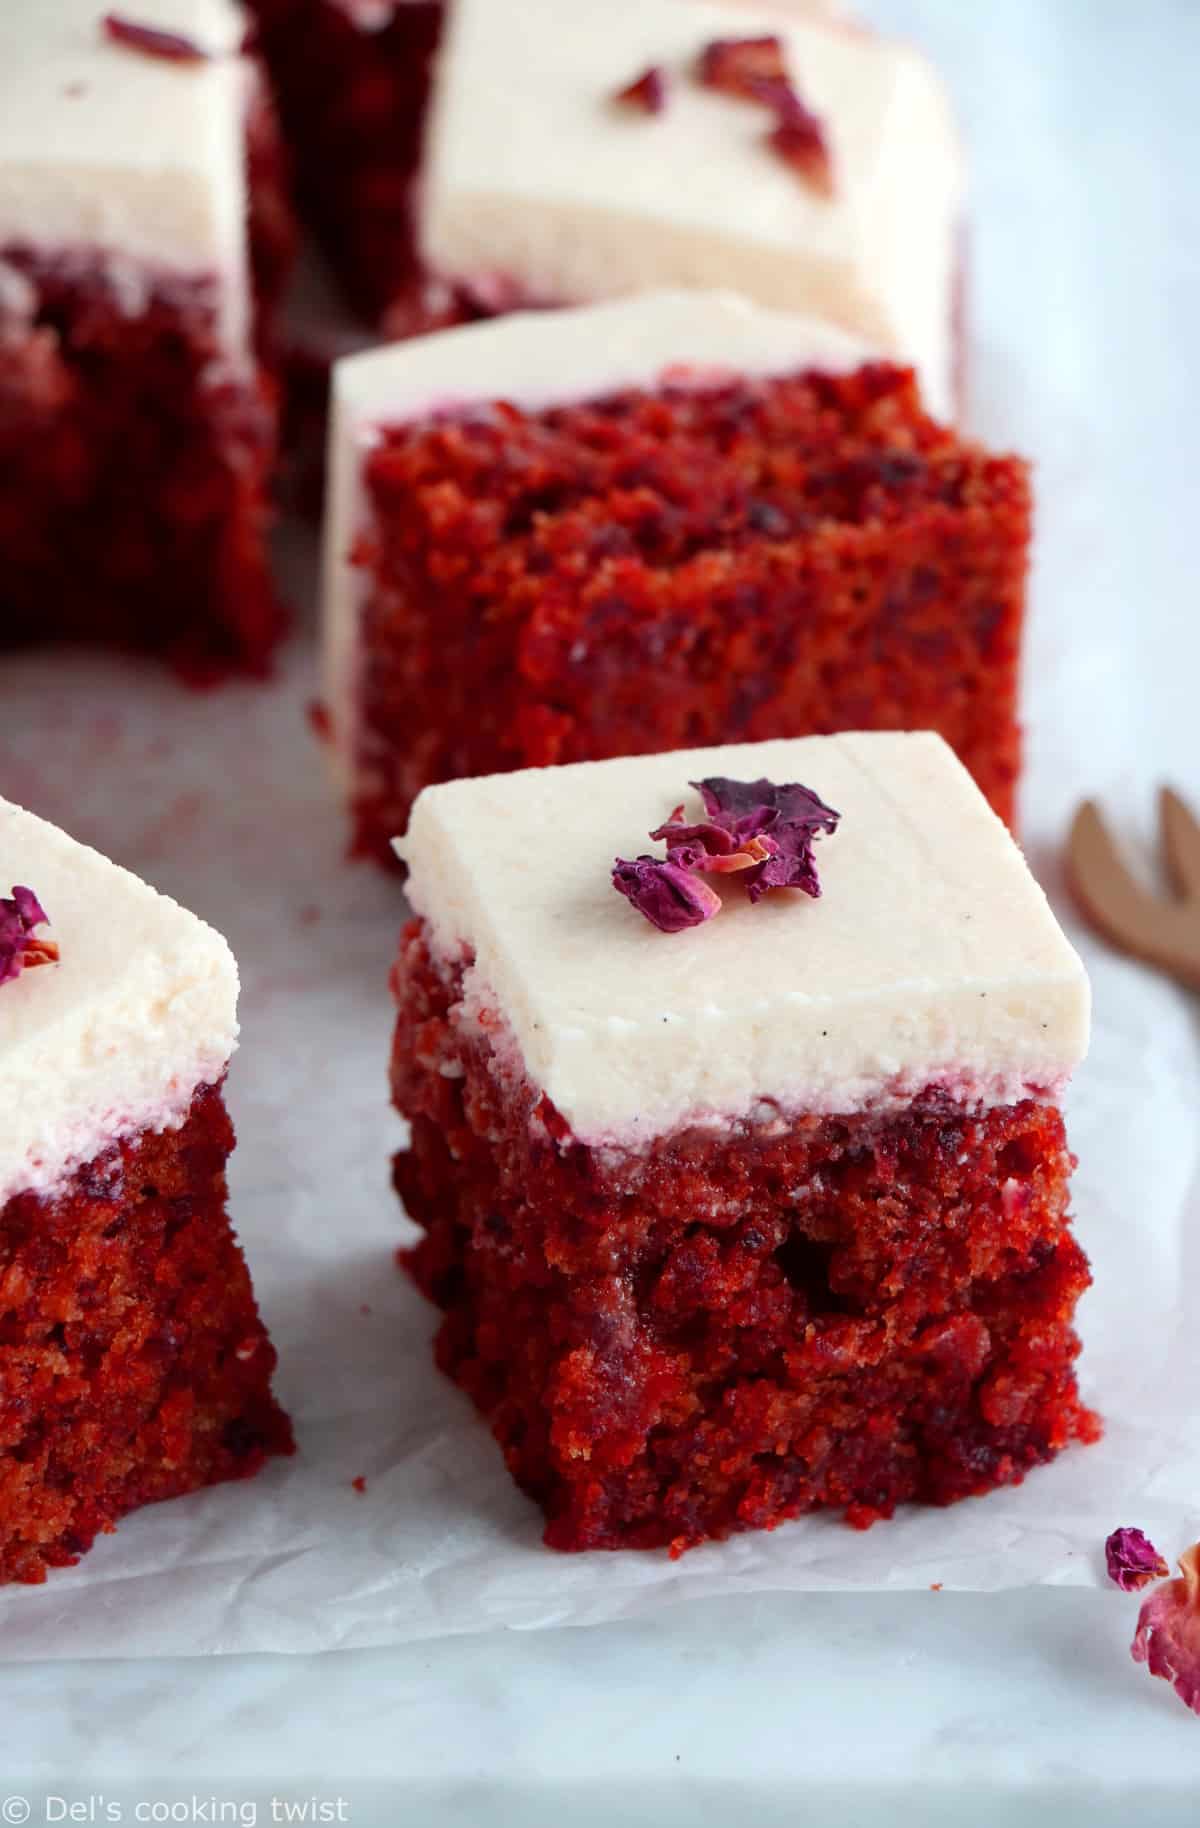 You will love this red velvet beetroot cake prepared without any food coloring.